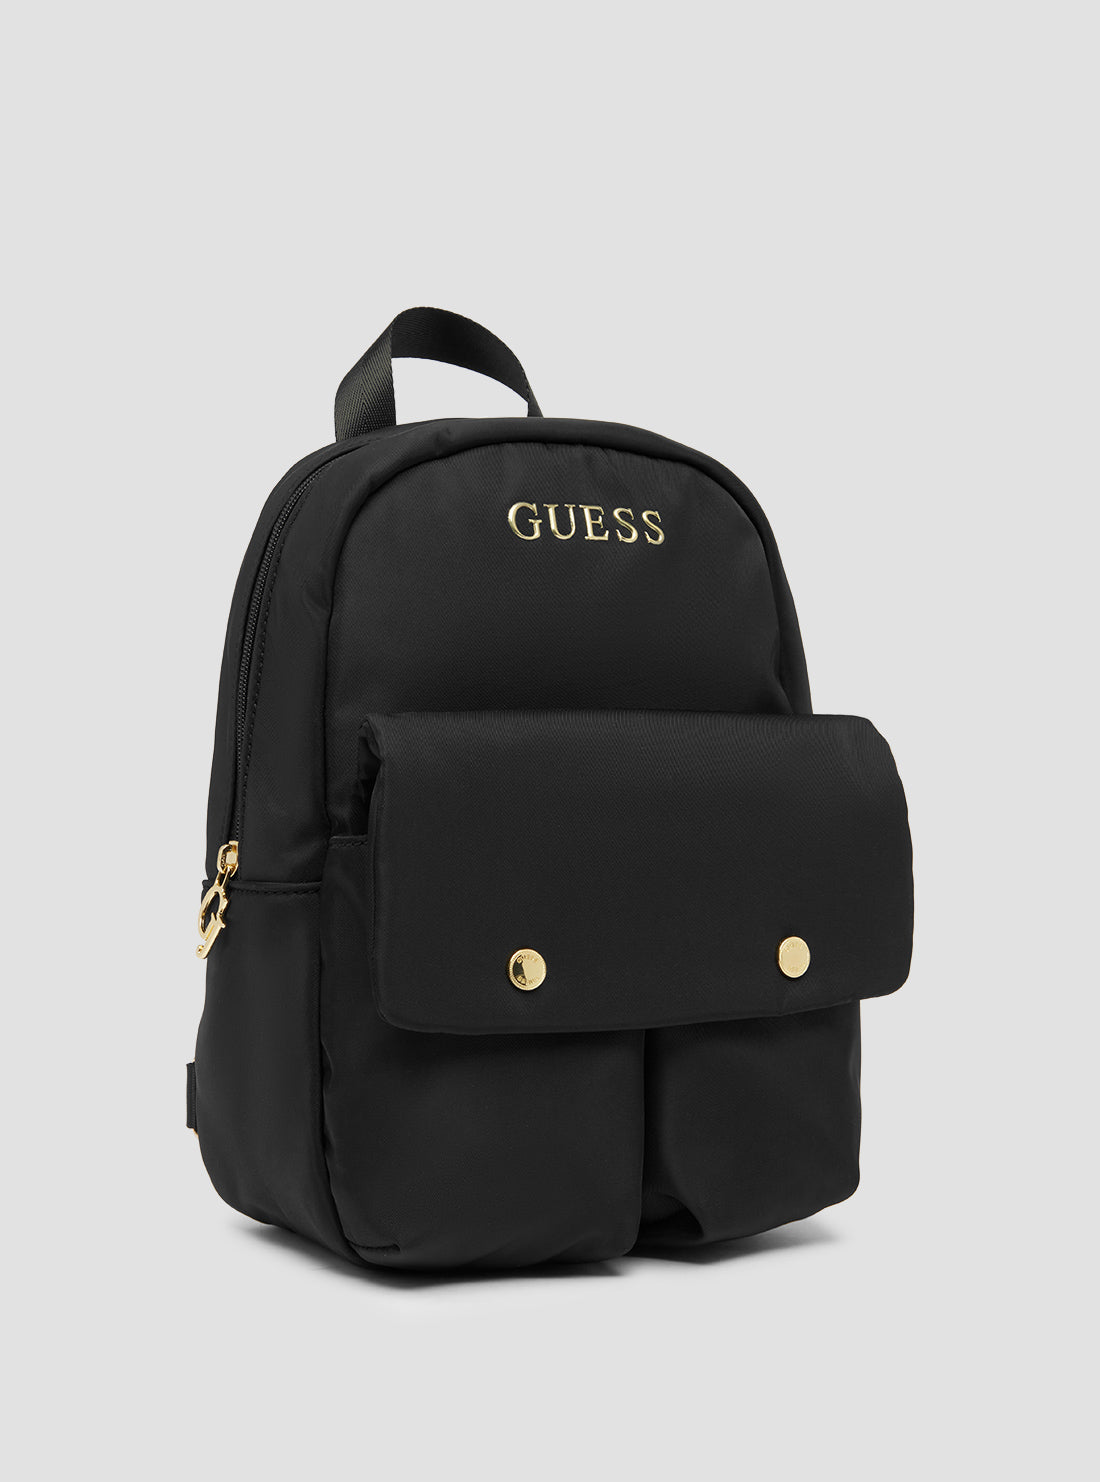 Black Active Backpack | GUESS Women's Handbags | side view